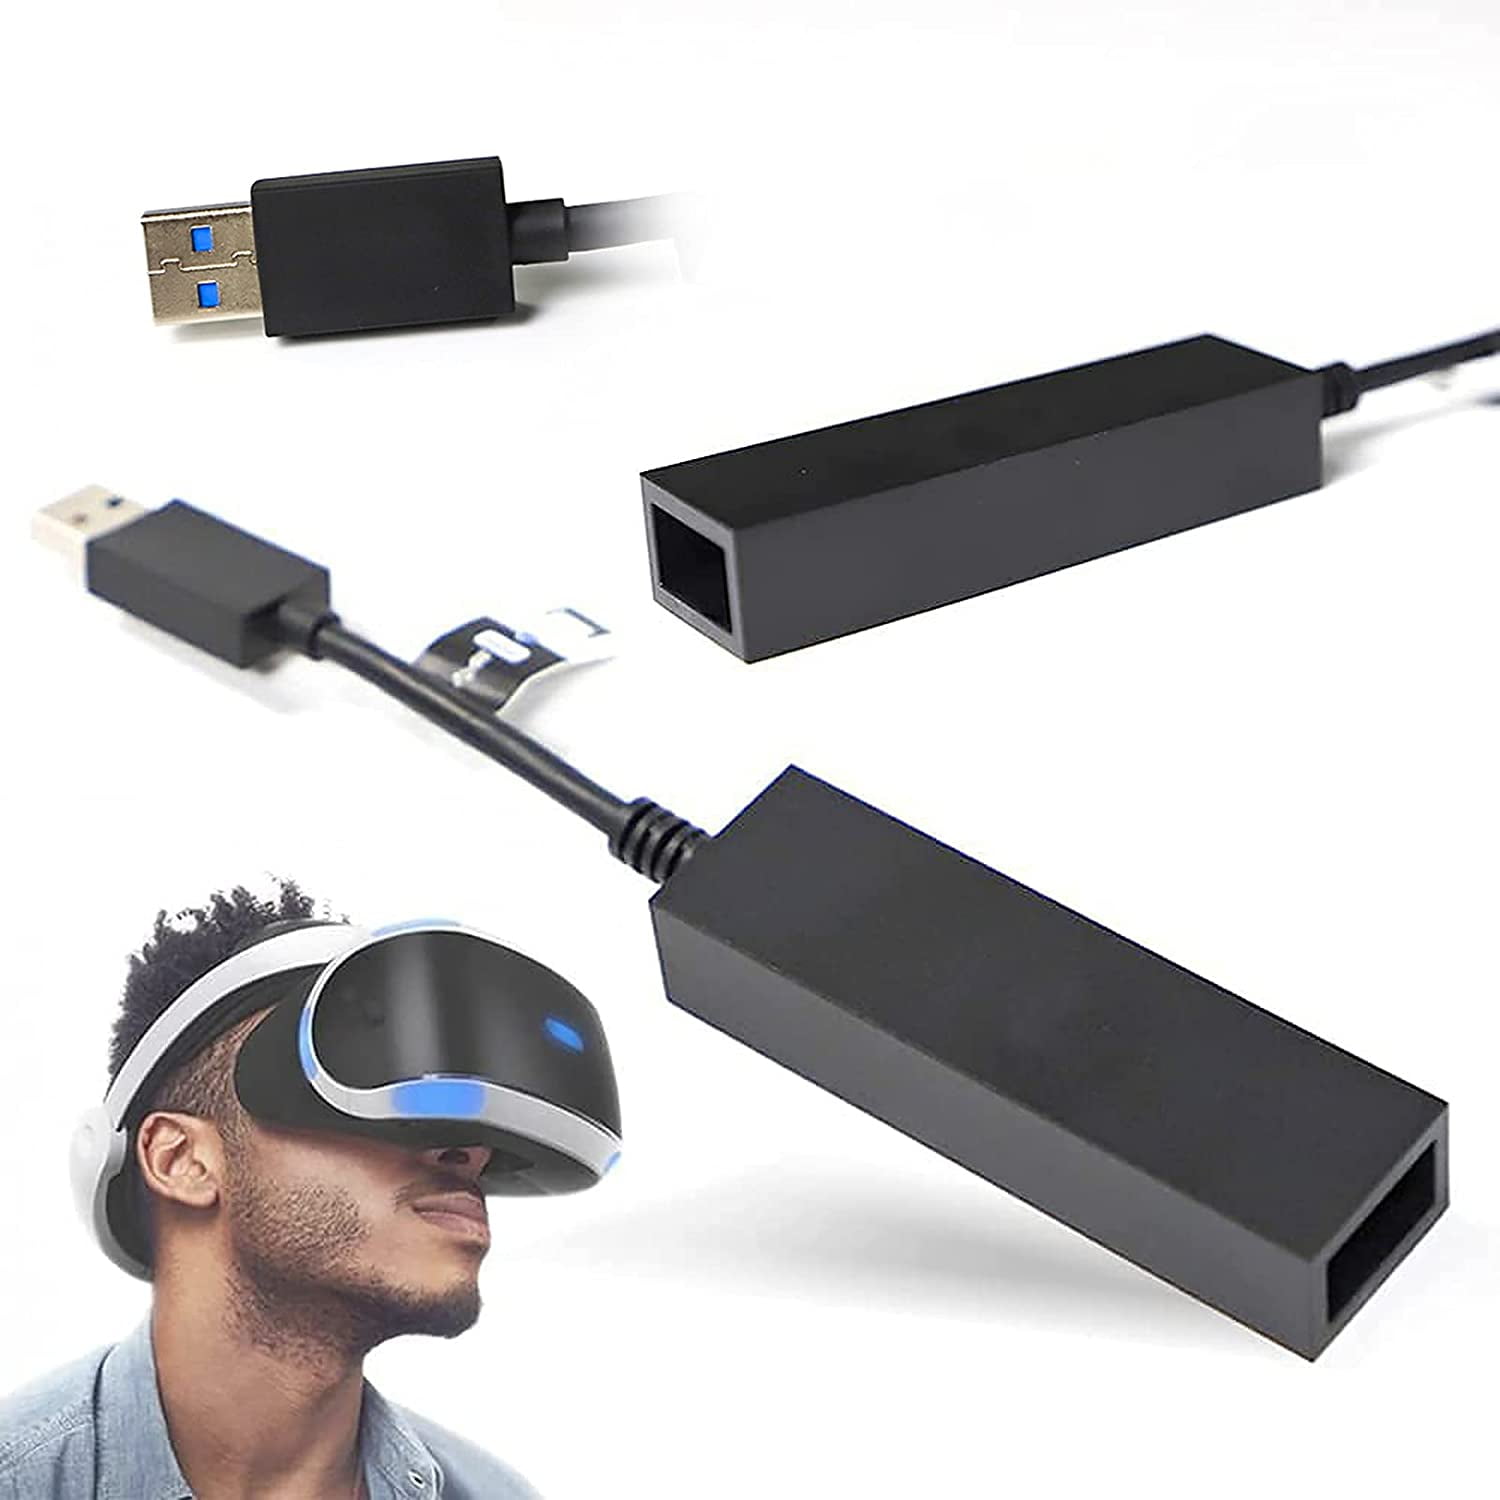 Luscious Tårer rod PS5 Vr Adapter Cable, Mini Camera Adapter, Extension Cable, USB 3.0  Portable External Hard Drive, PS5 PS4 VR4 Connector - Walmart.com